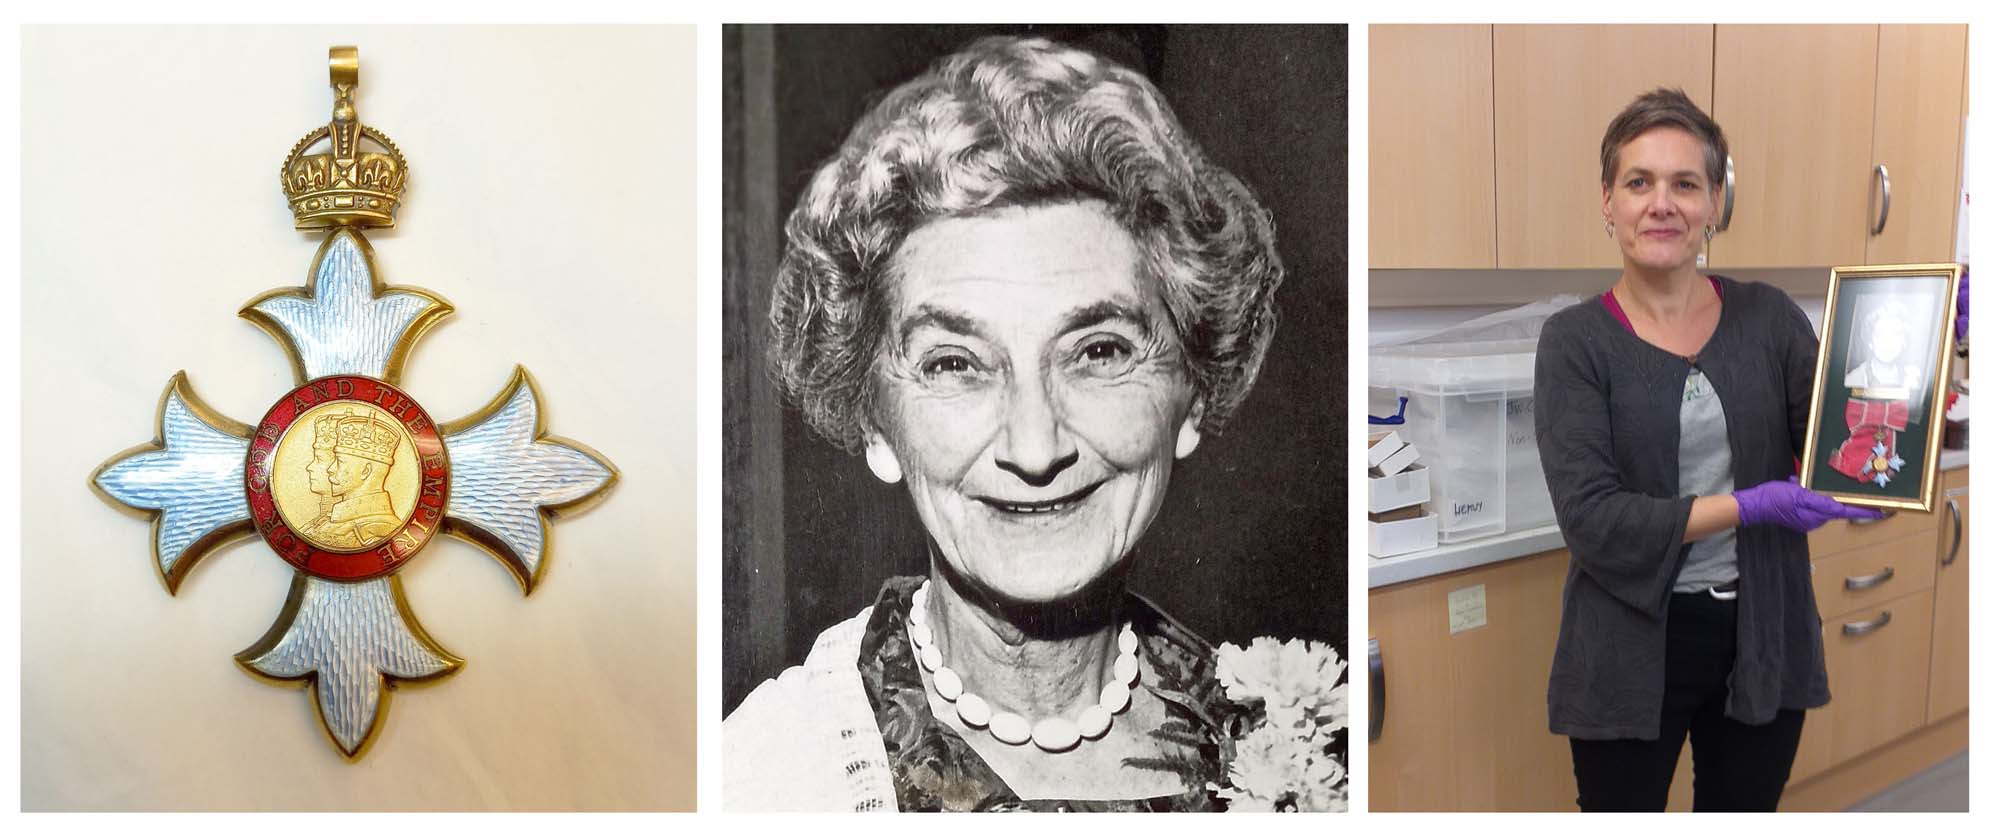 Miss Ruth Tomlinsons CBE has been taken into the care of Leicester Museums & Galleries